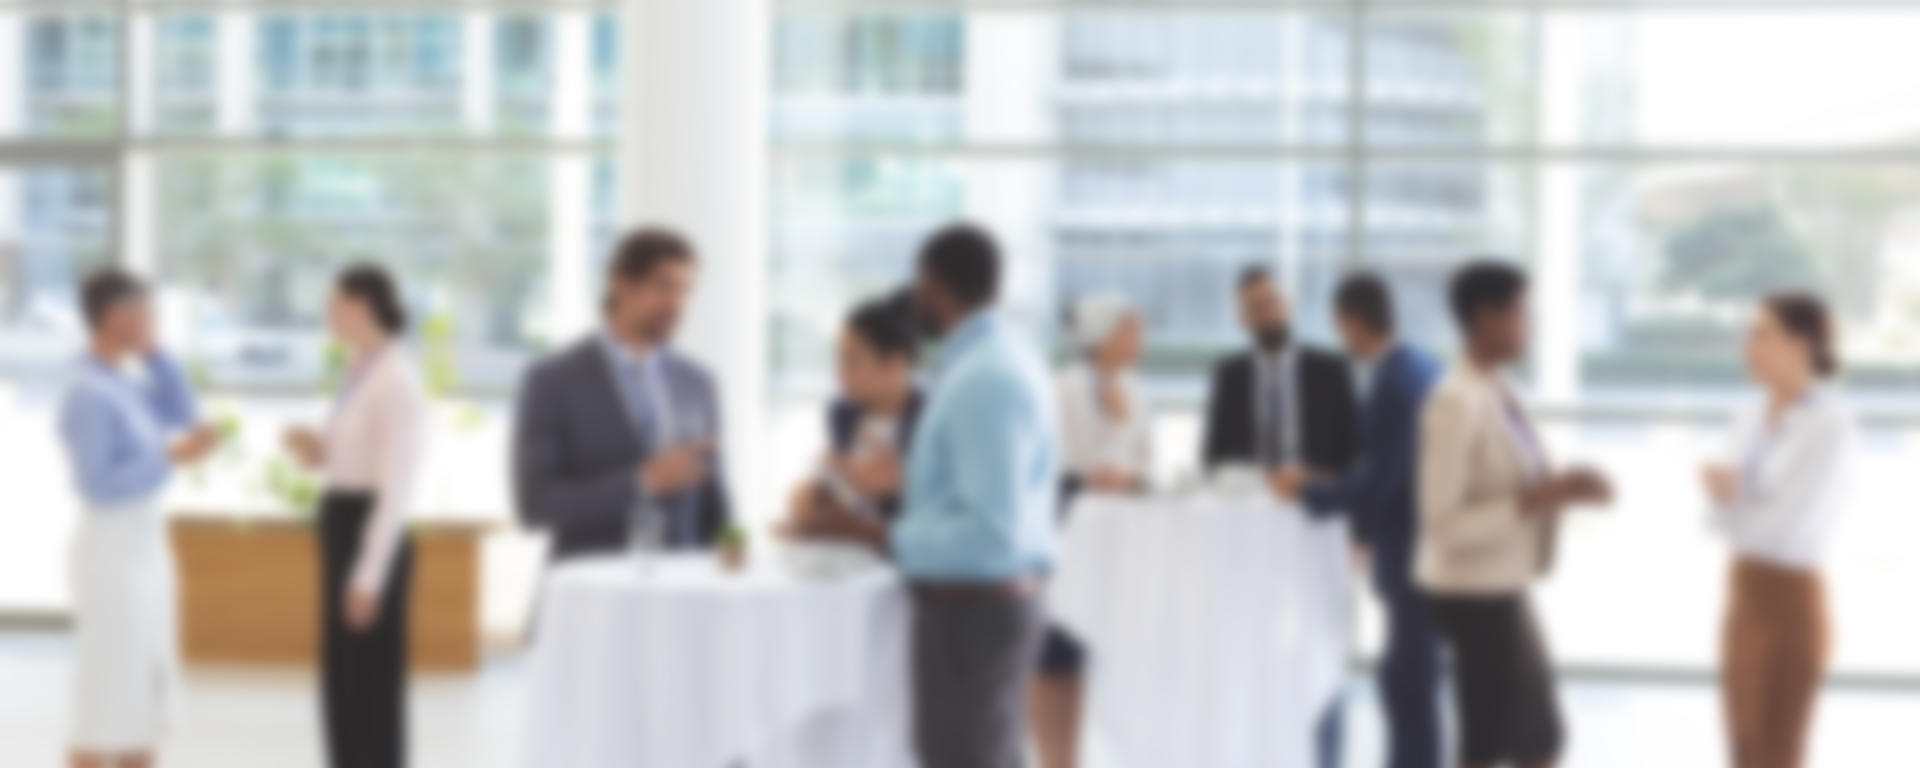 Blurred picture of people attending a professional networking event